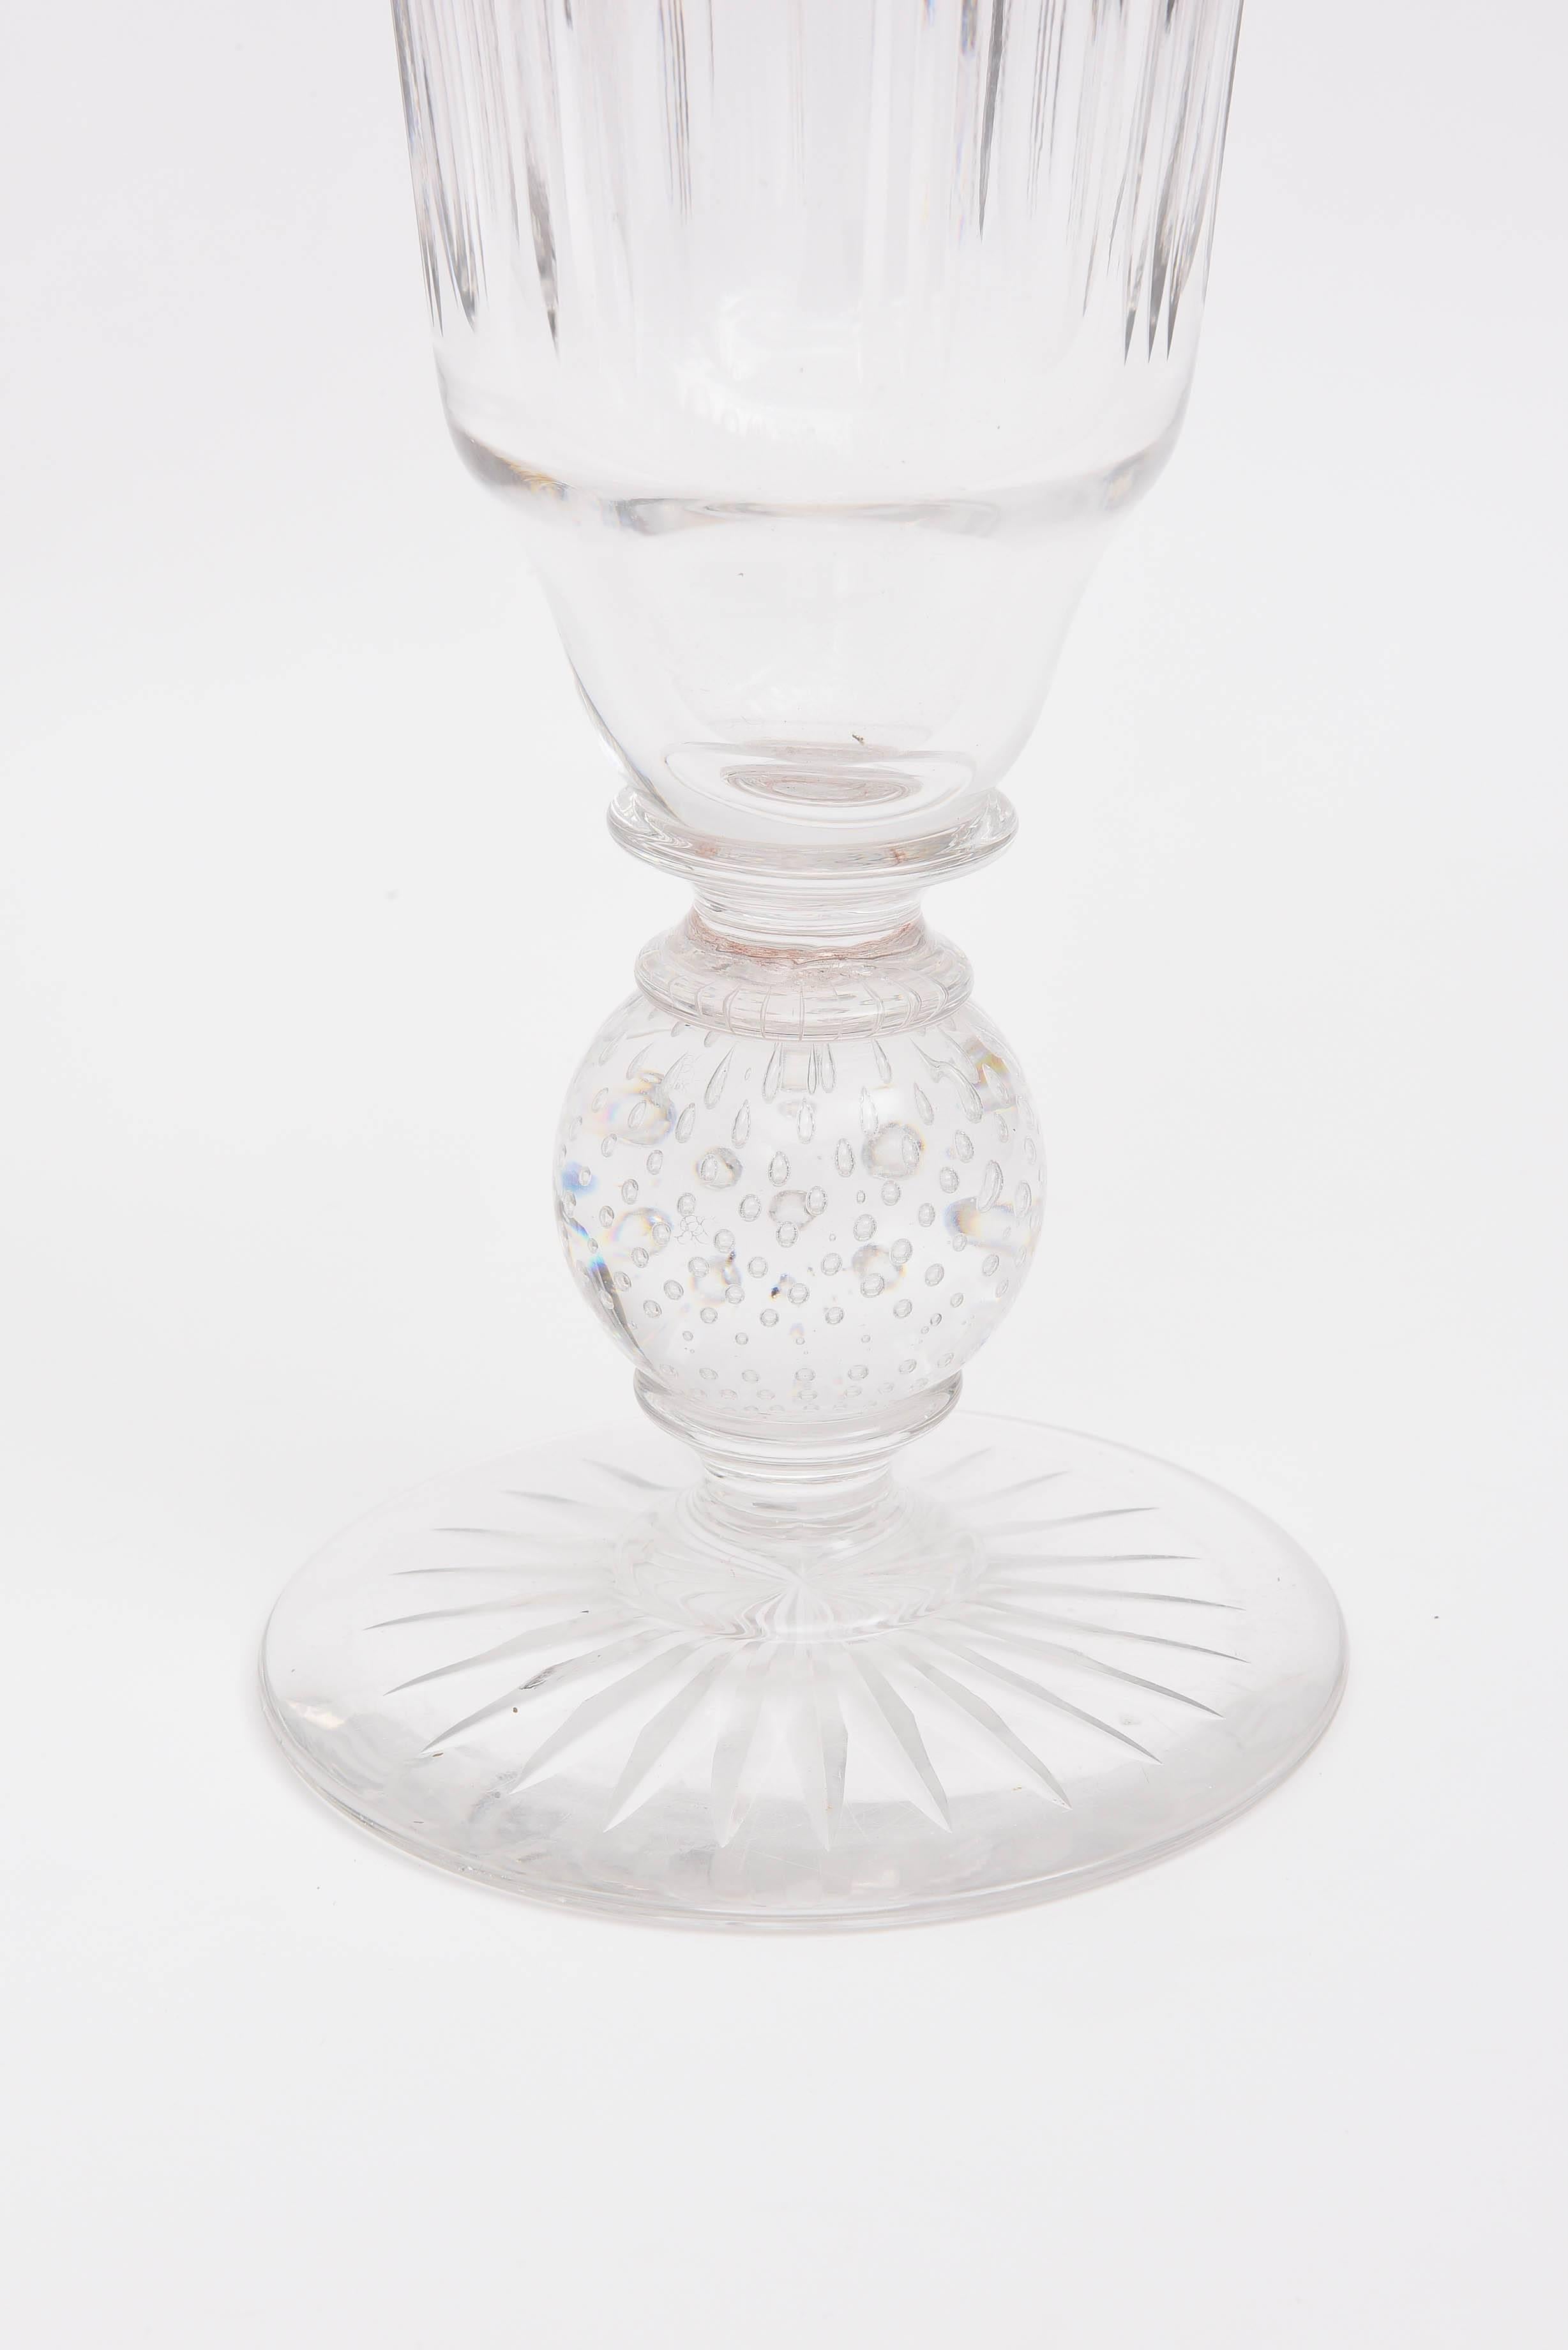 An Impressive and heavy cut glass vase by Pairpoint, MA. Featuring their classic controlled bubble stem with a lovely cross diamond hatch pattern. A nice deep 